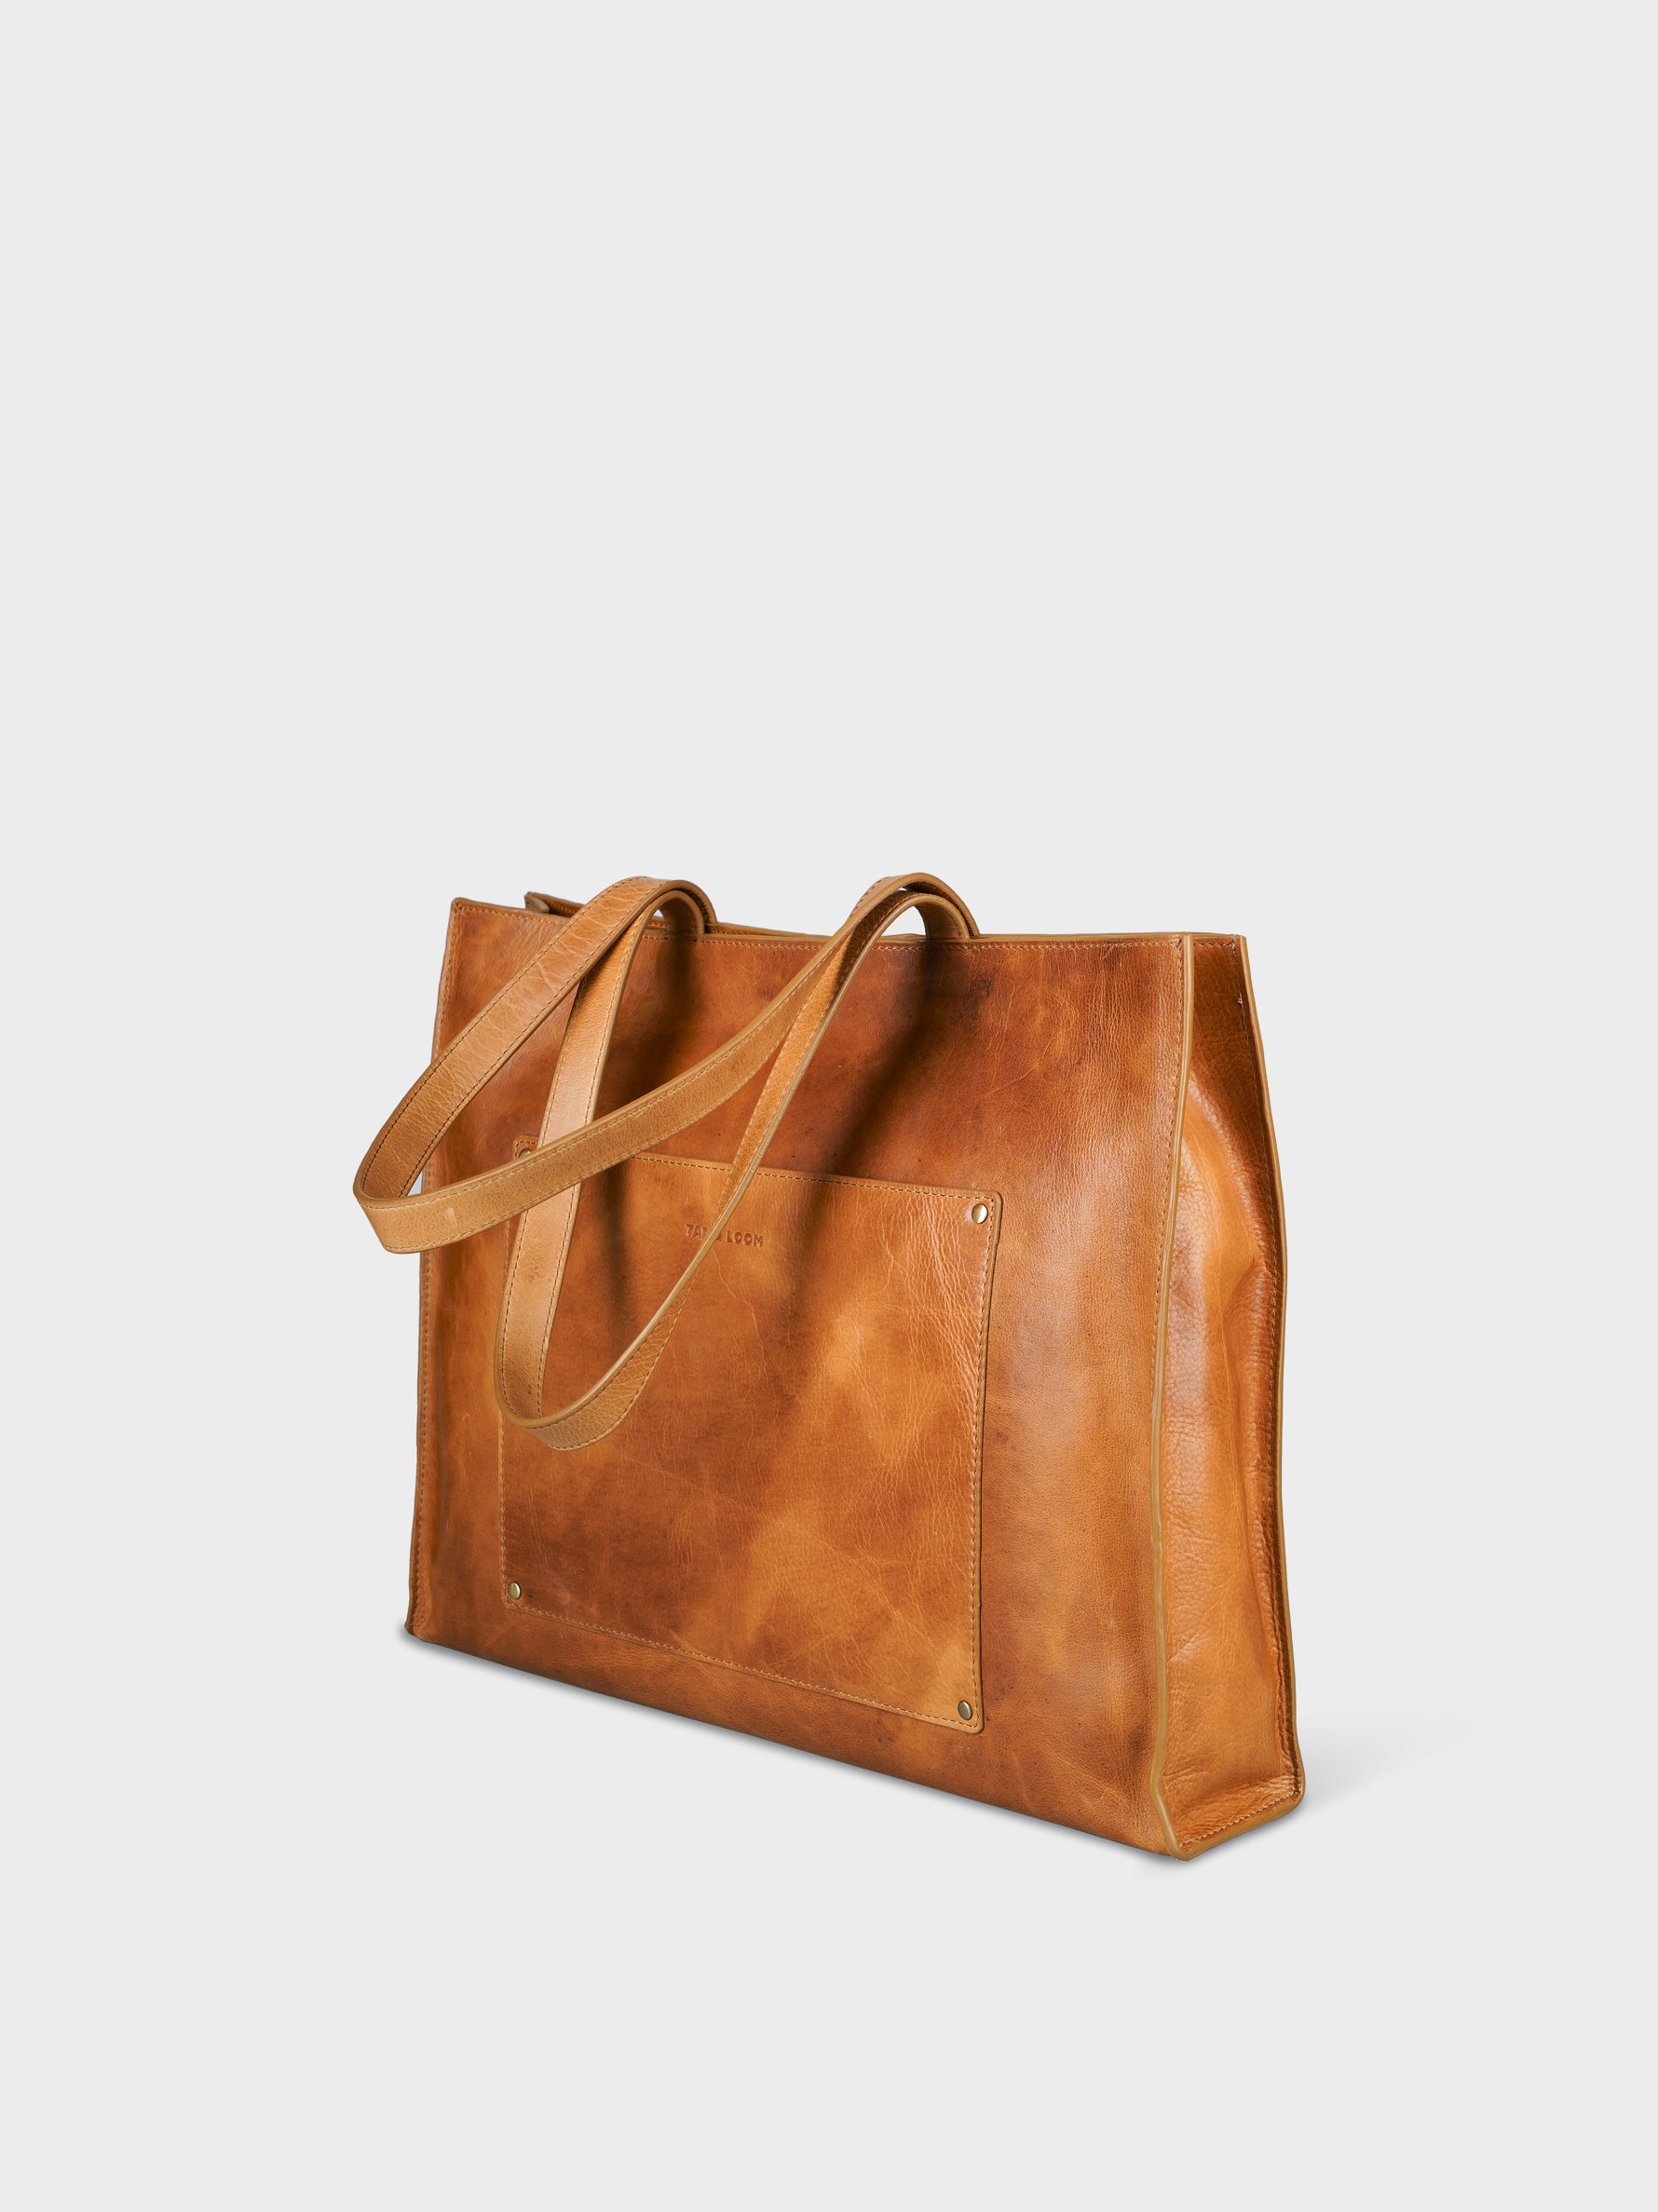 Handcrafted Genuine Vegetable Tanned Leather Artist's Tote Tuscany Tan for Women Tan & Loom